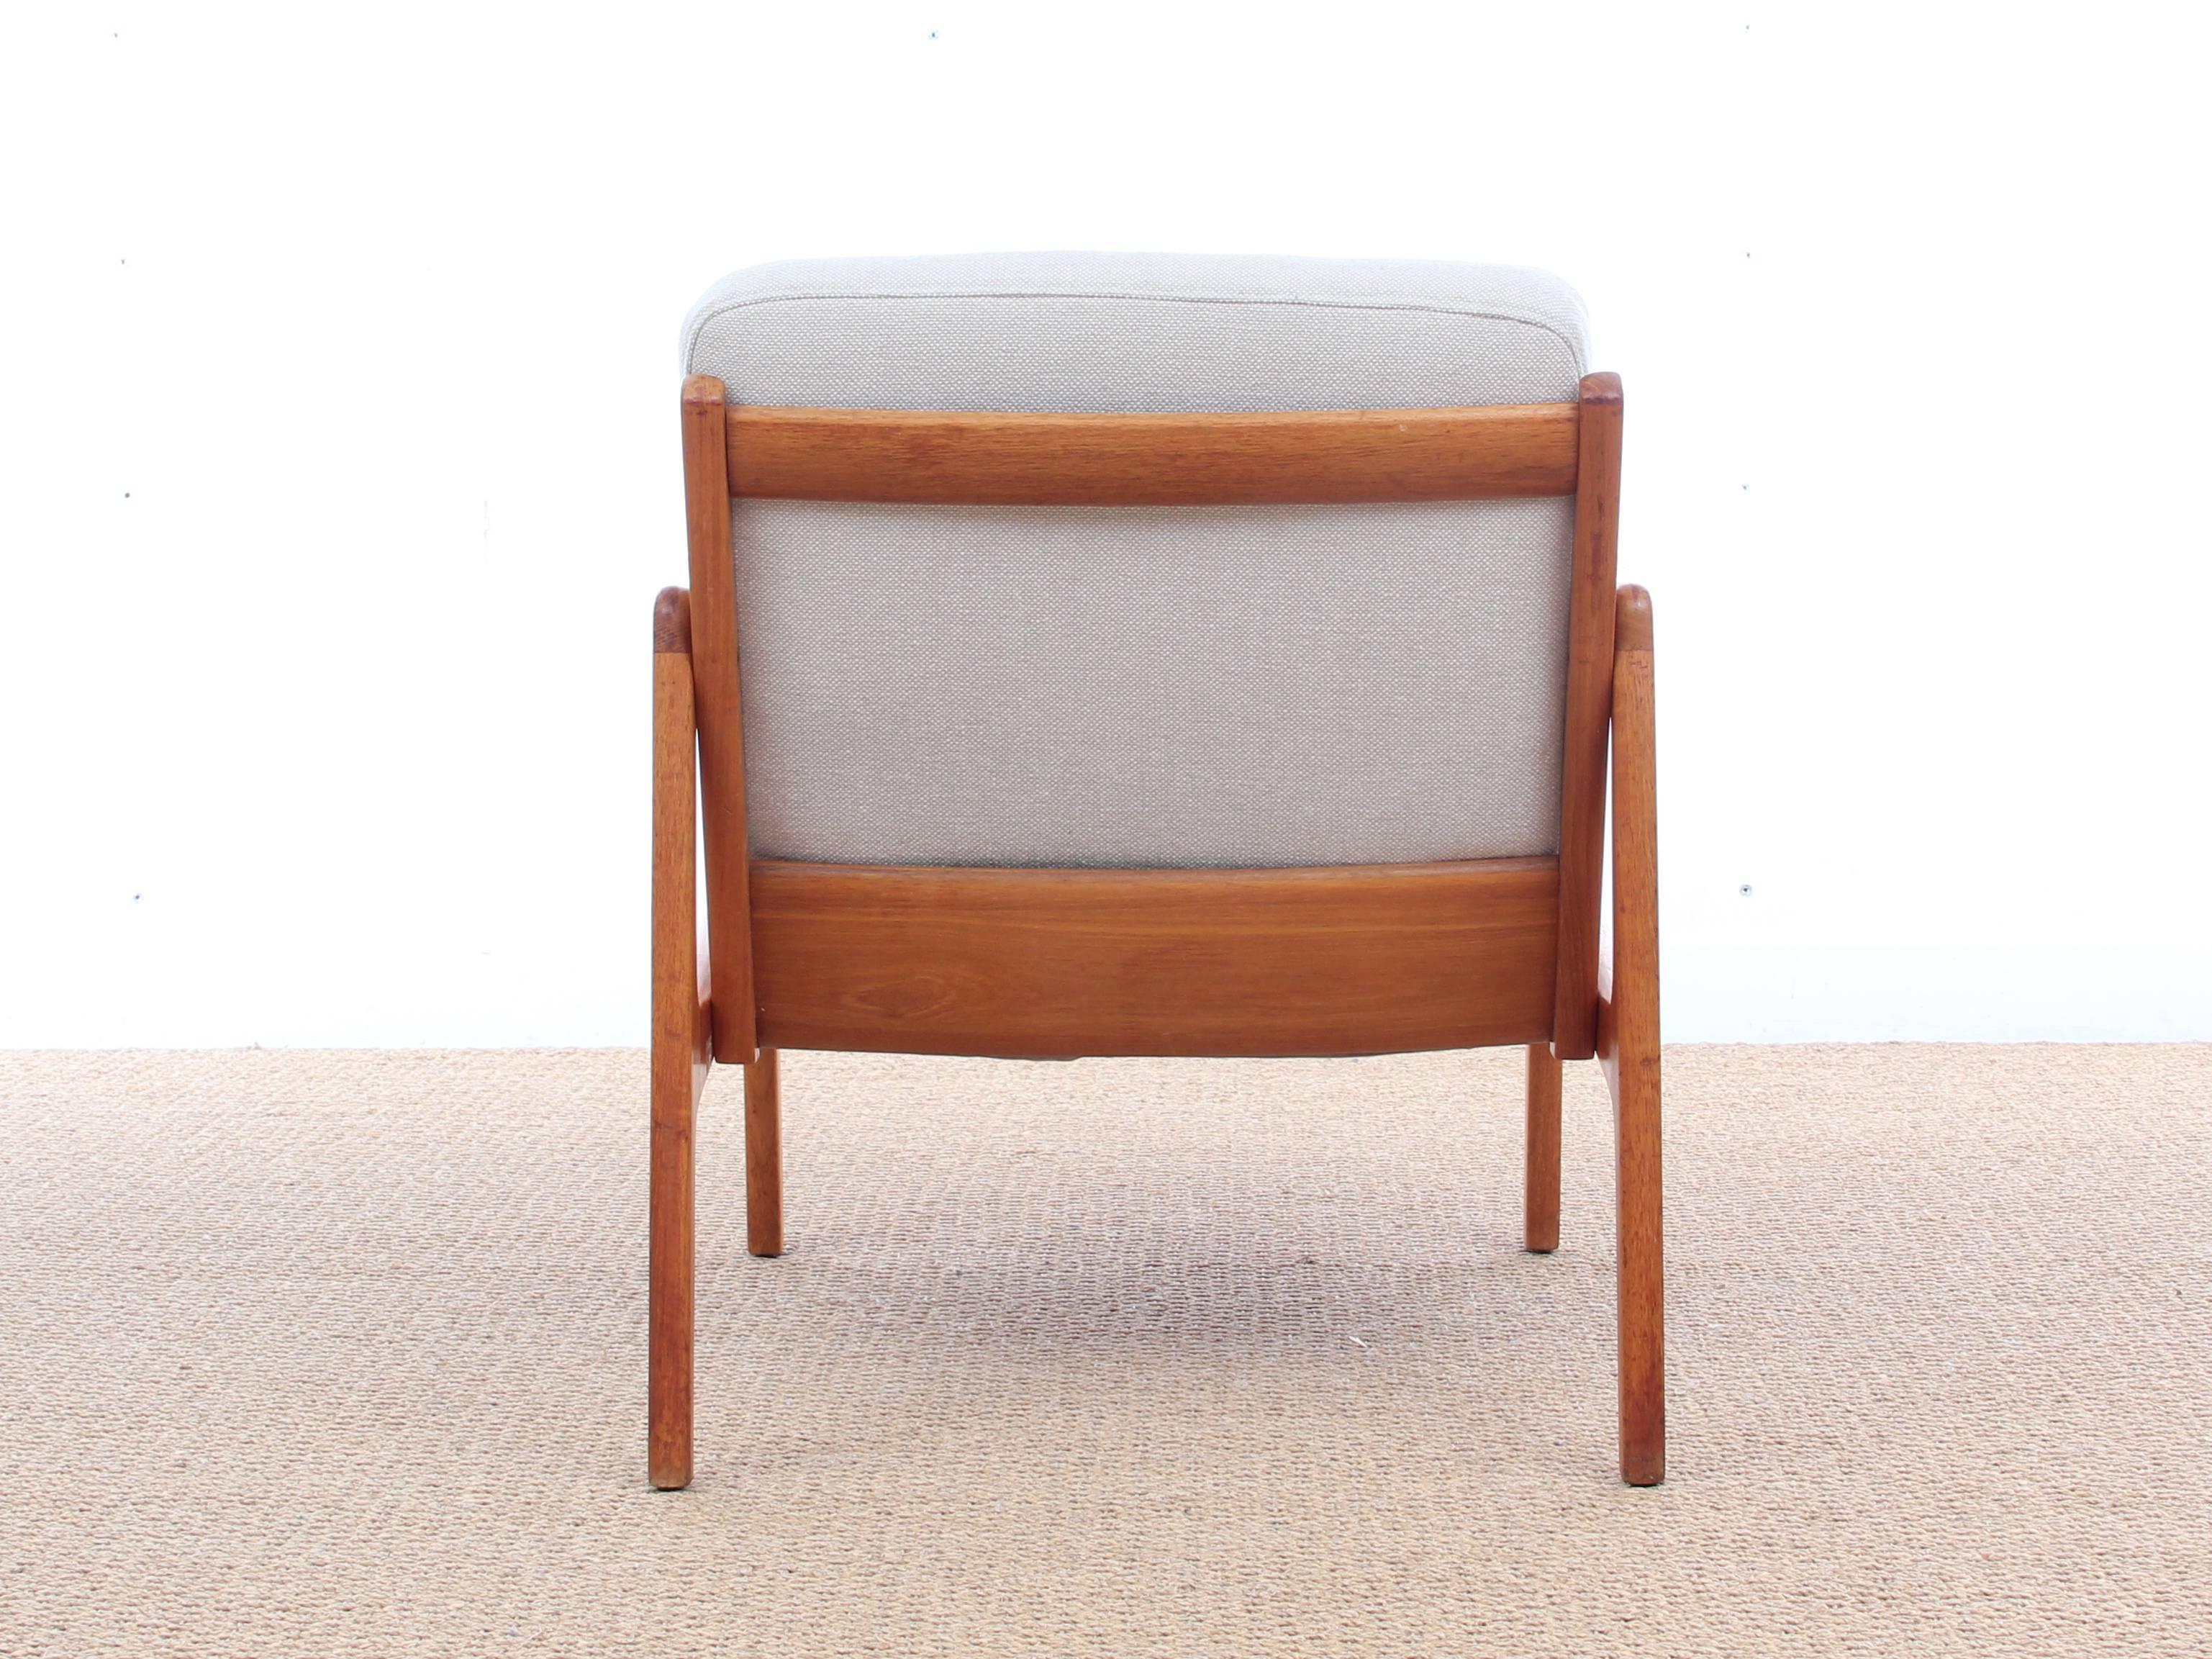 Mid-20th Century Mid-Century Modern Danish Pair of Lounge Chairs, Teak Model 110 by Ole Wanscher